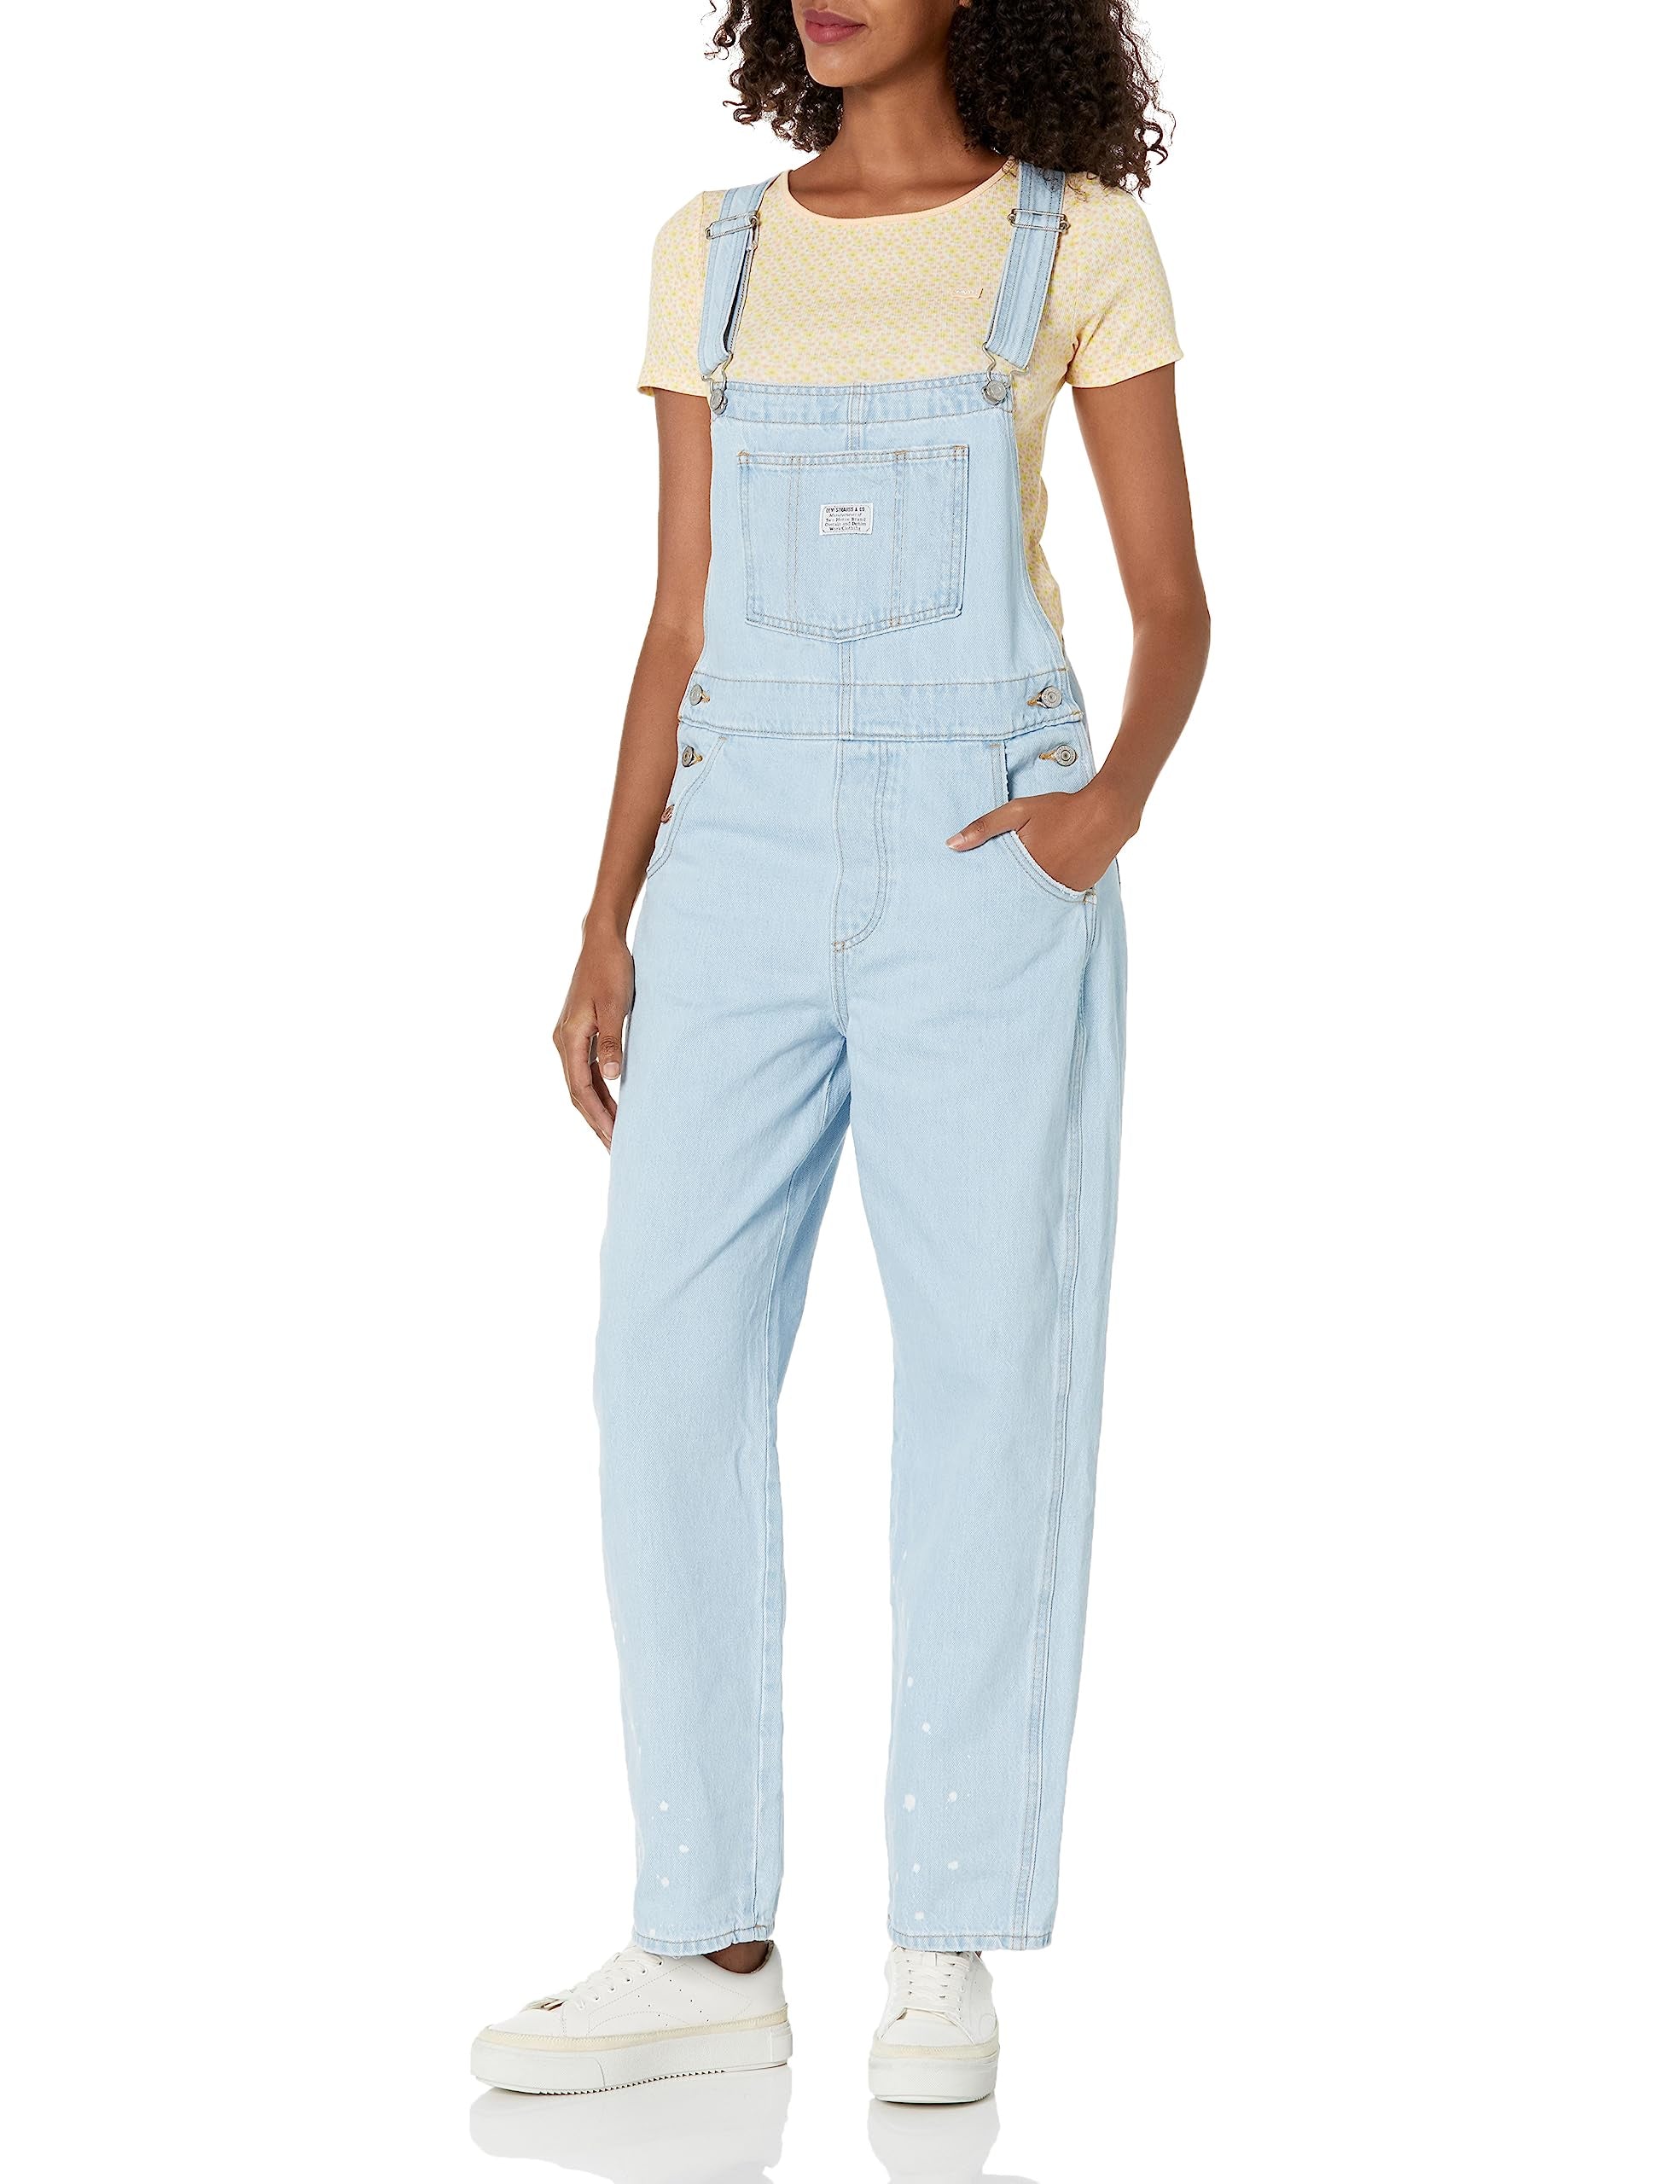 Women's Vintage Overalls In Stone Shadow